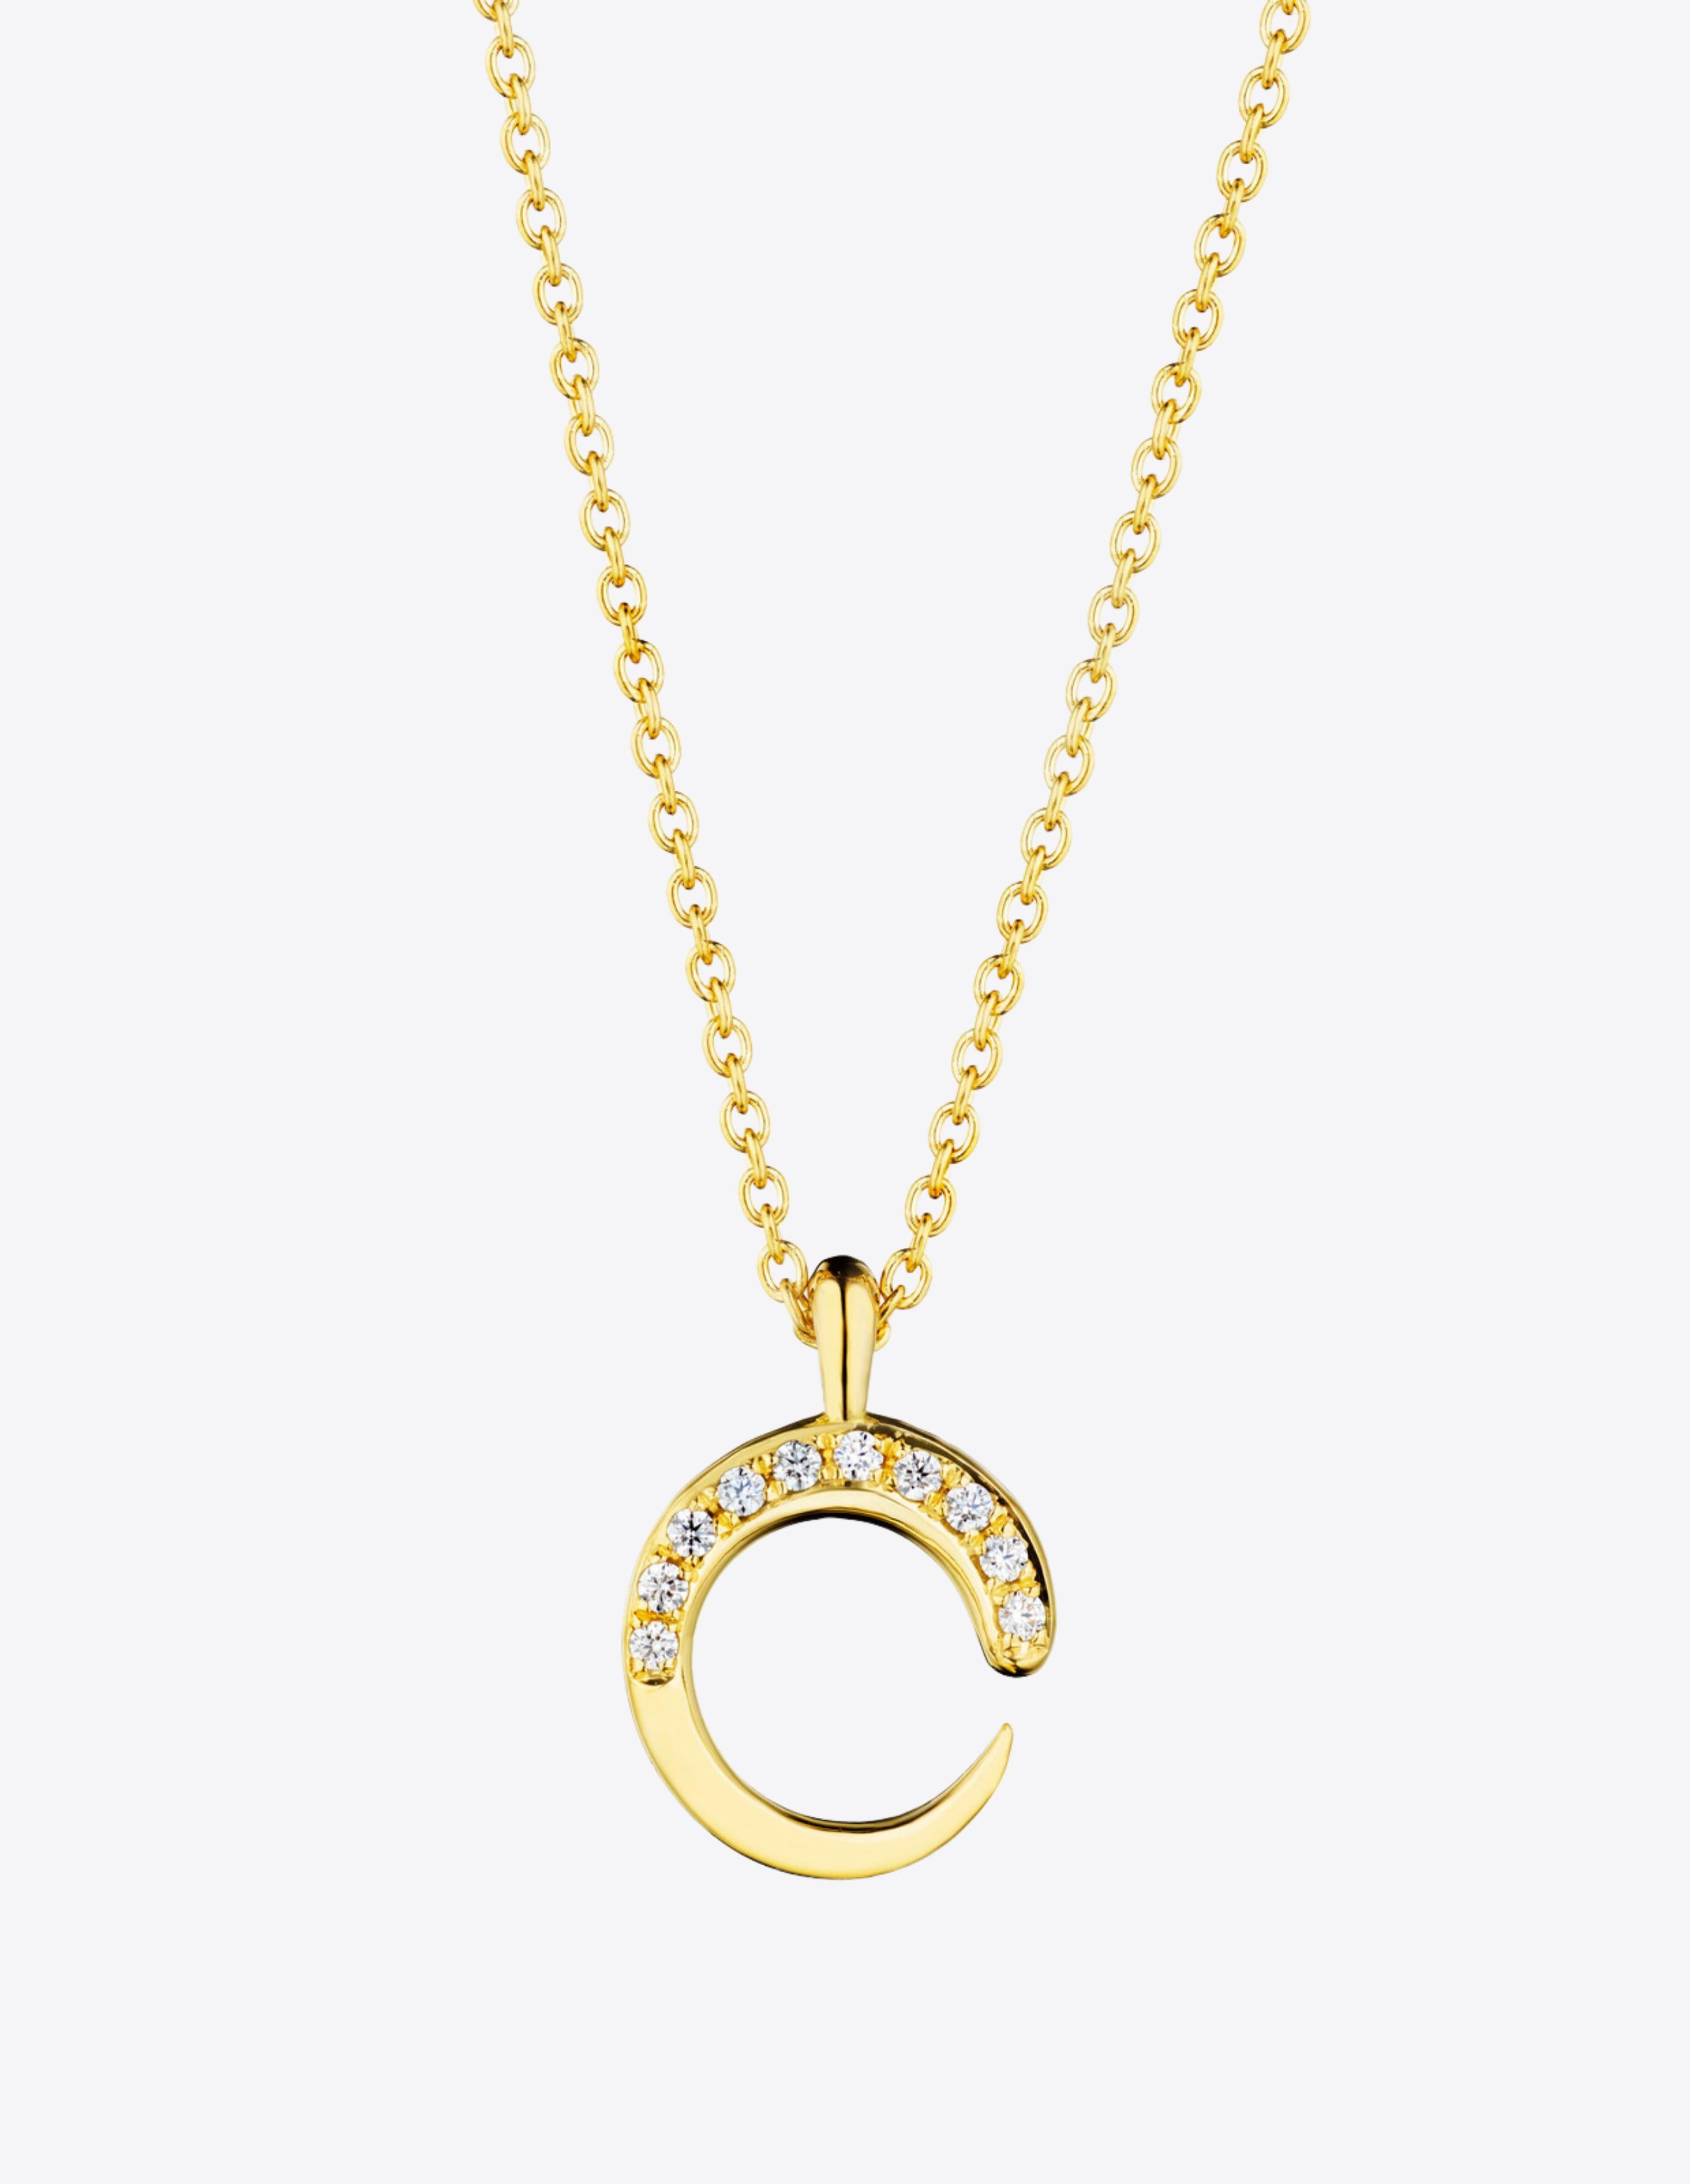 KHIRY signature Khartoum silhouette charm pendant in 18K Gold. Inspired by long horned cattle that are a store of value and wealth in Sudan, set with diamond for added brilliance. 0.5 inch pendant on 18-20 inch adjustable link chain with lobster